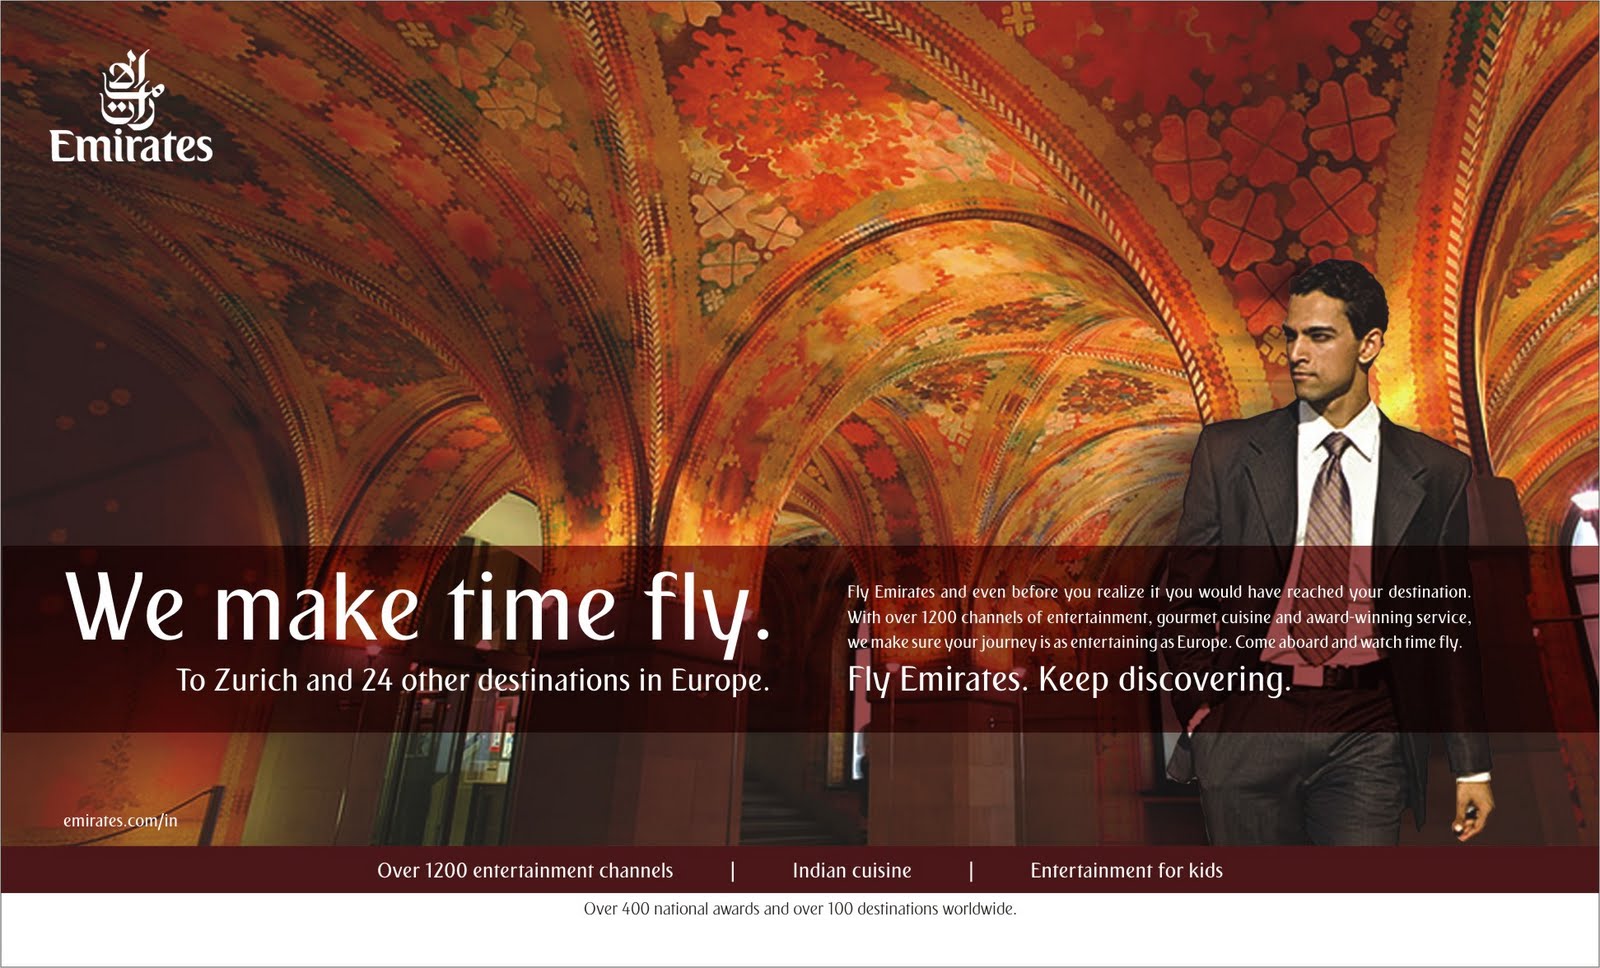 Emirates: We Make Time Fly